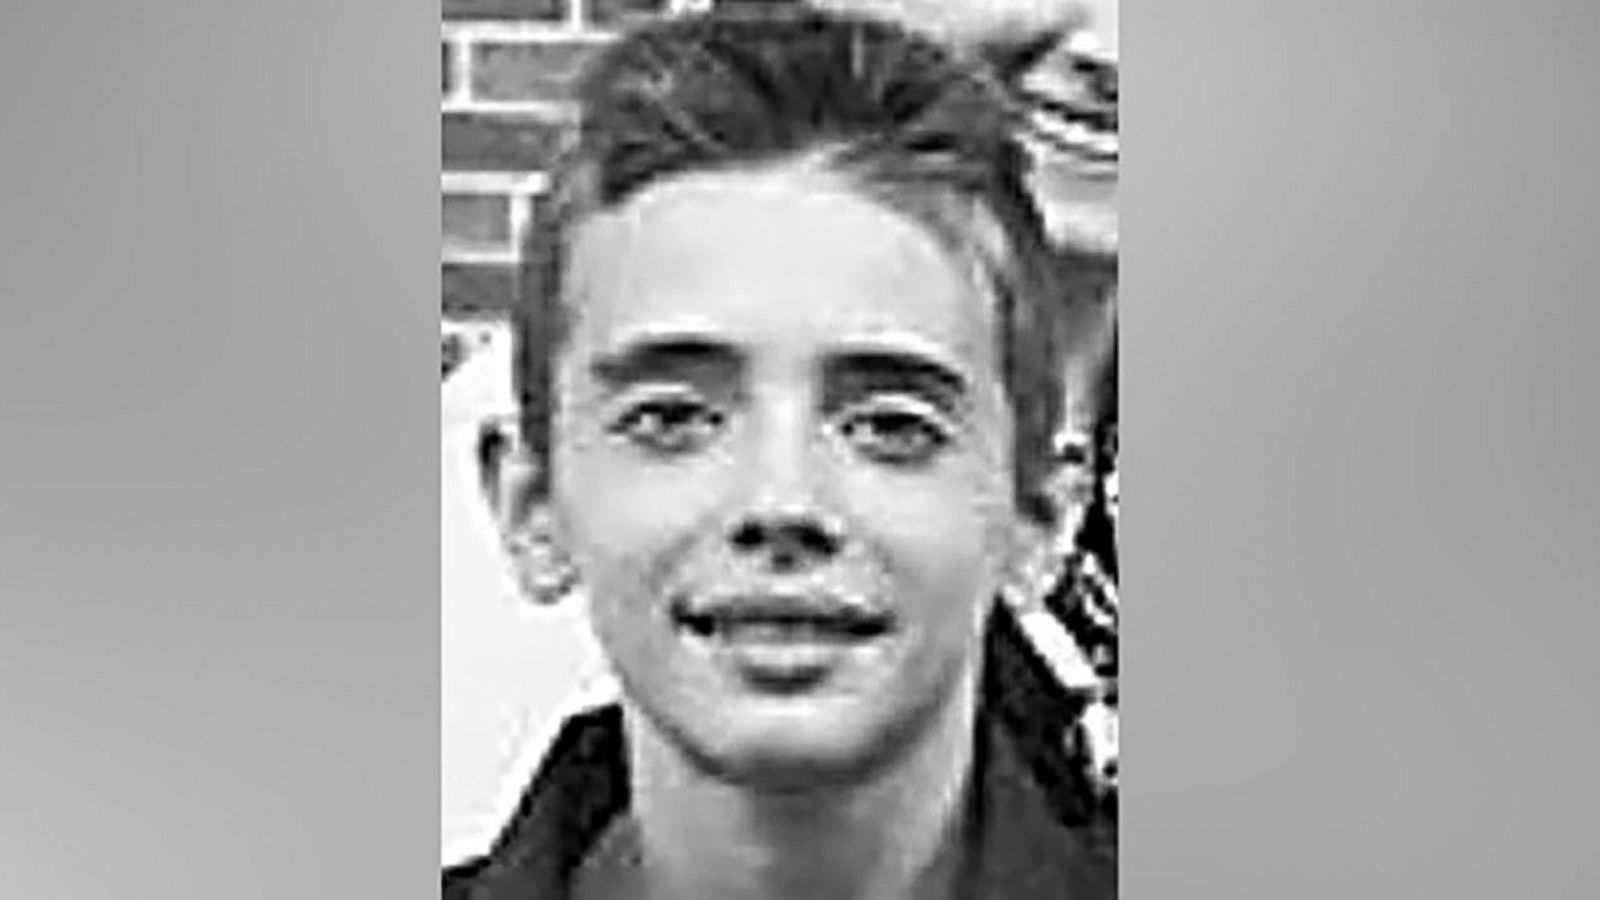 Missing 15-year-old Pennsylvania boy may be hiking Appalachian Trail:  Police - ABC News